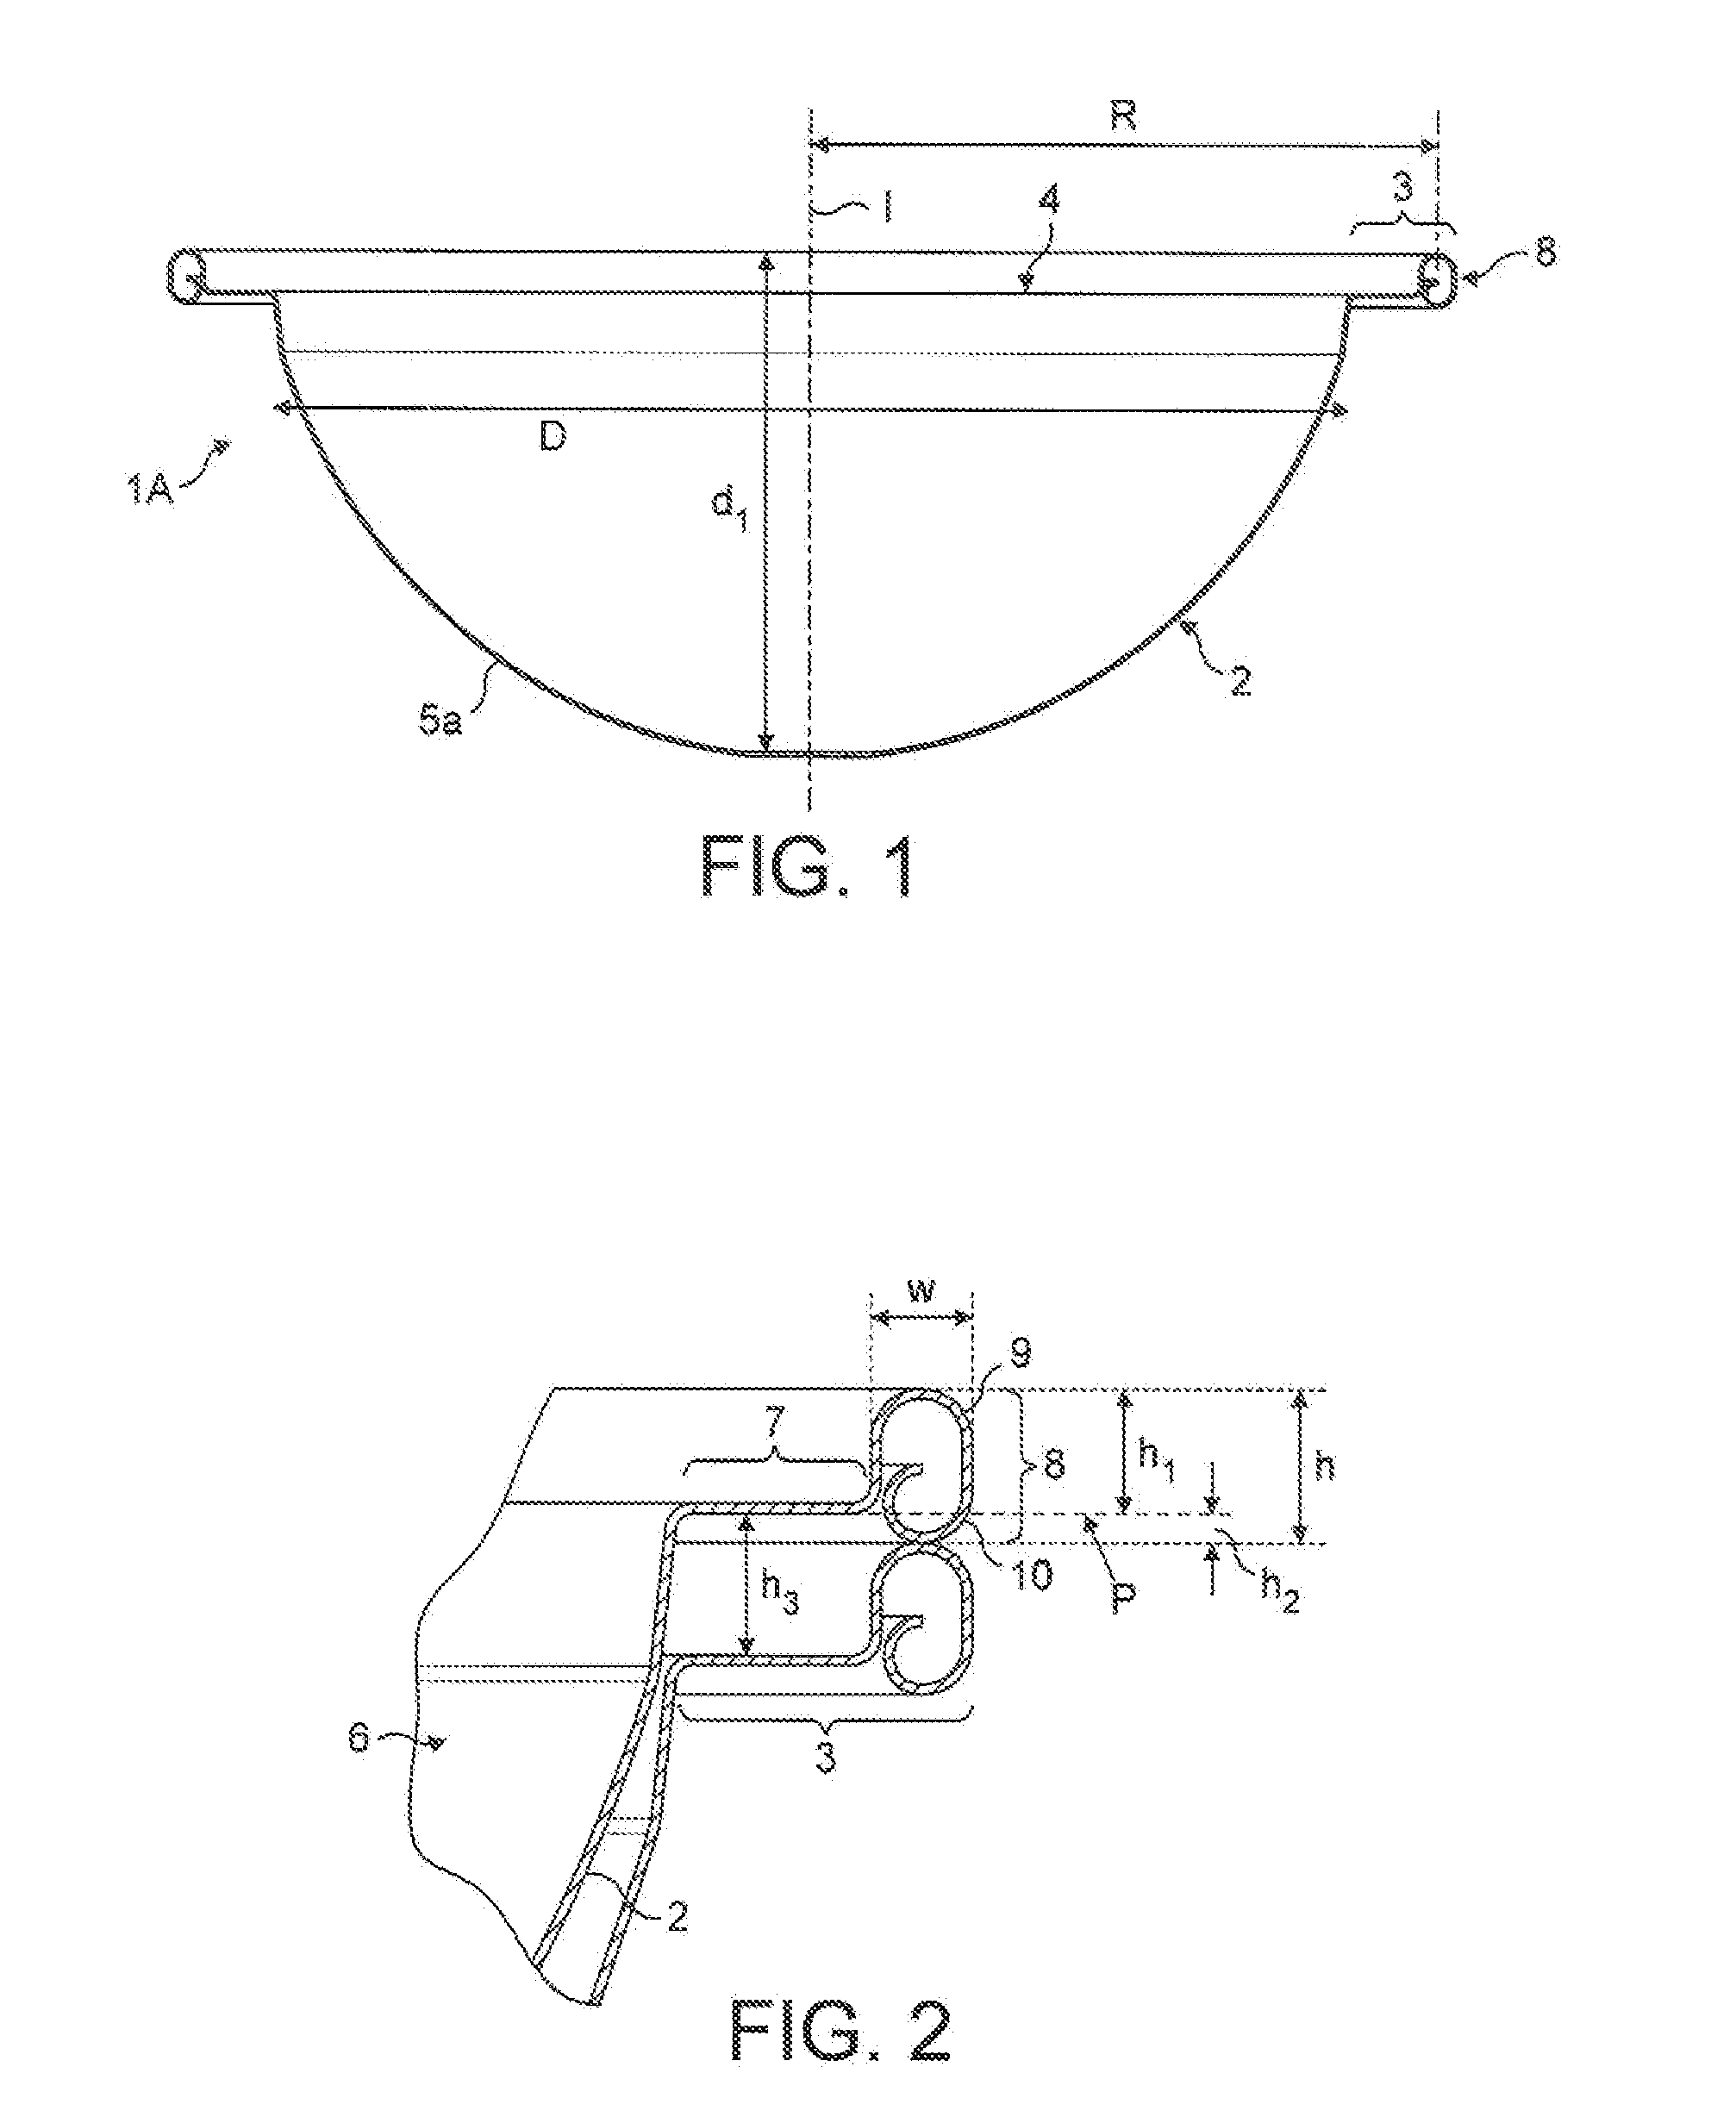 Capsule and system for preparing a beverage by centrifugation in a beverage production device